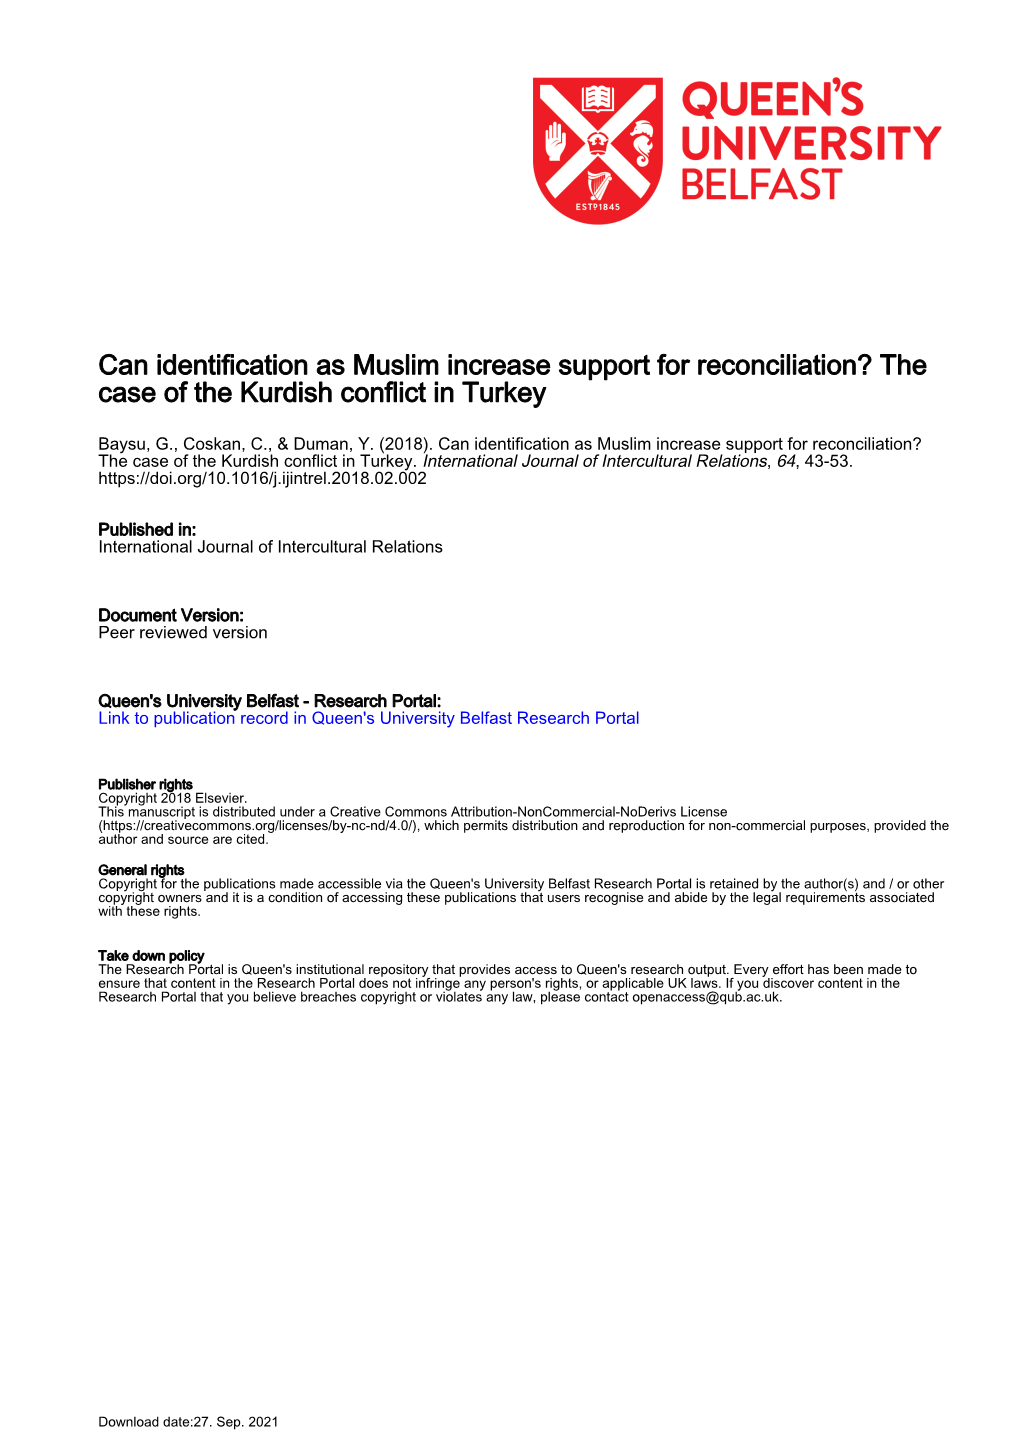 Can Identification As Muslim Increase Support for Reconciliation? the Case of the Kurdish Conflict in Turkey